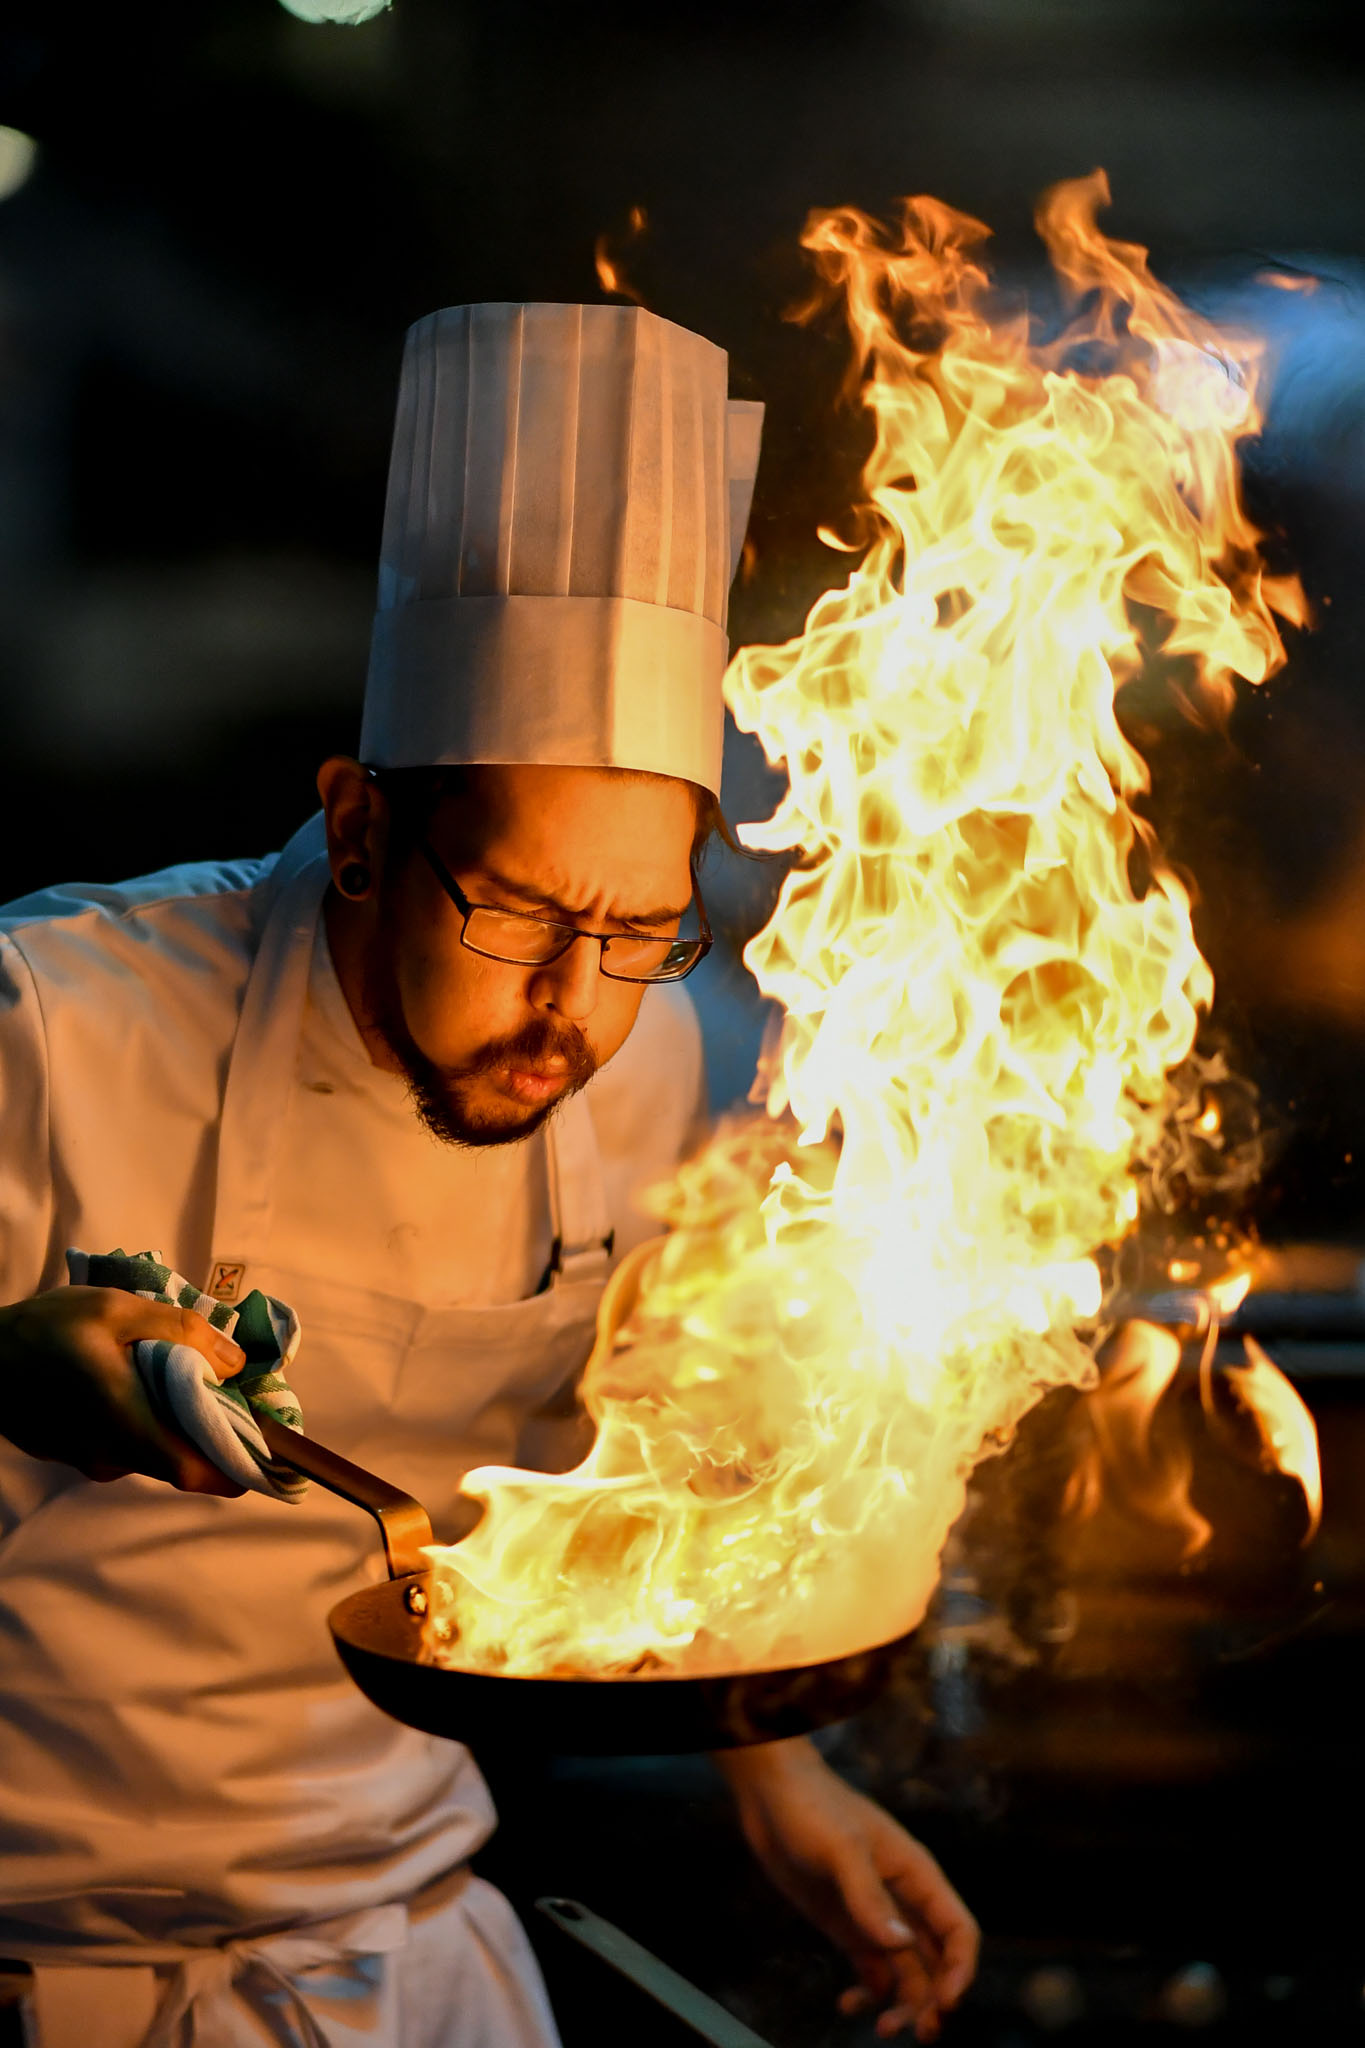 Melbourne, 30 May 2017 - Tyson Kromhout of the Salsa Bar & Grill in Port Douglas reacts to flames from his fry pan at the Australian selection trials of the Bocuse d'Or culinary competition held during the Food Service Australia show at the Royal Exhibition Building in Melbourne, Australia. Photo Sydney Low